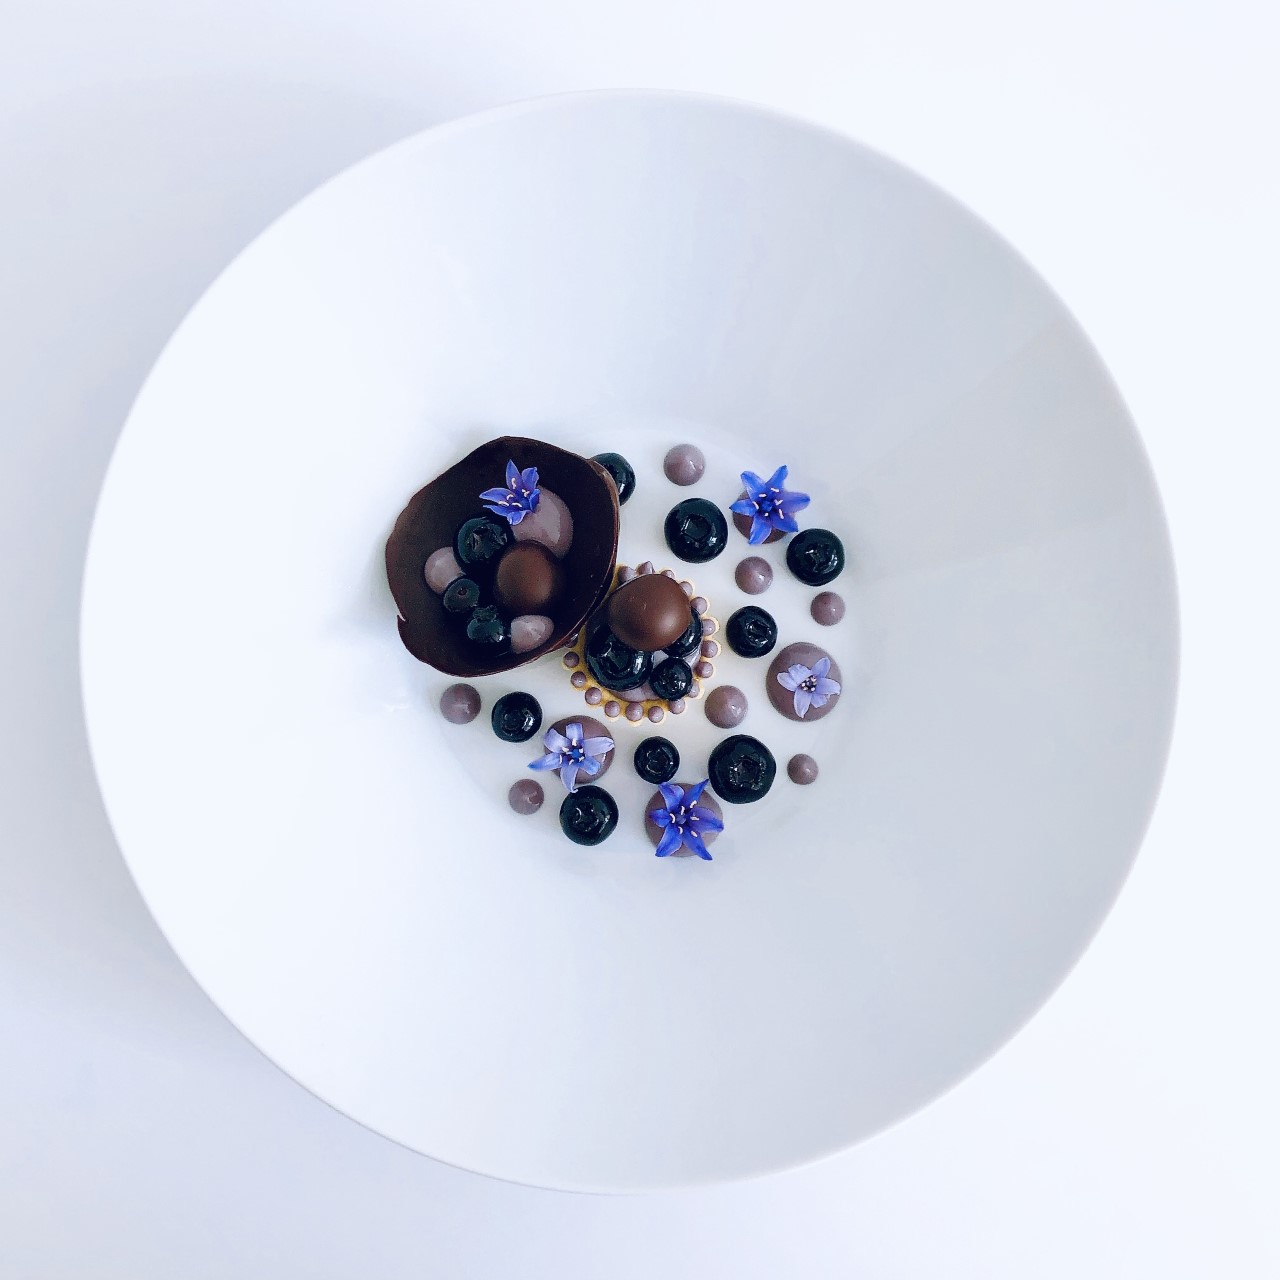 Tartlet with blueberries, dark chocolate and cardamom